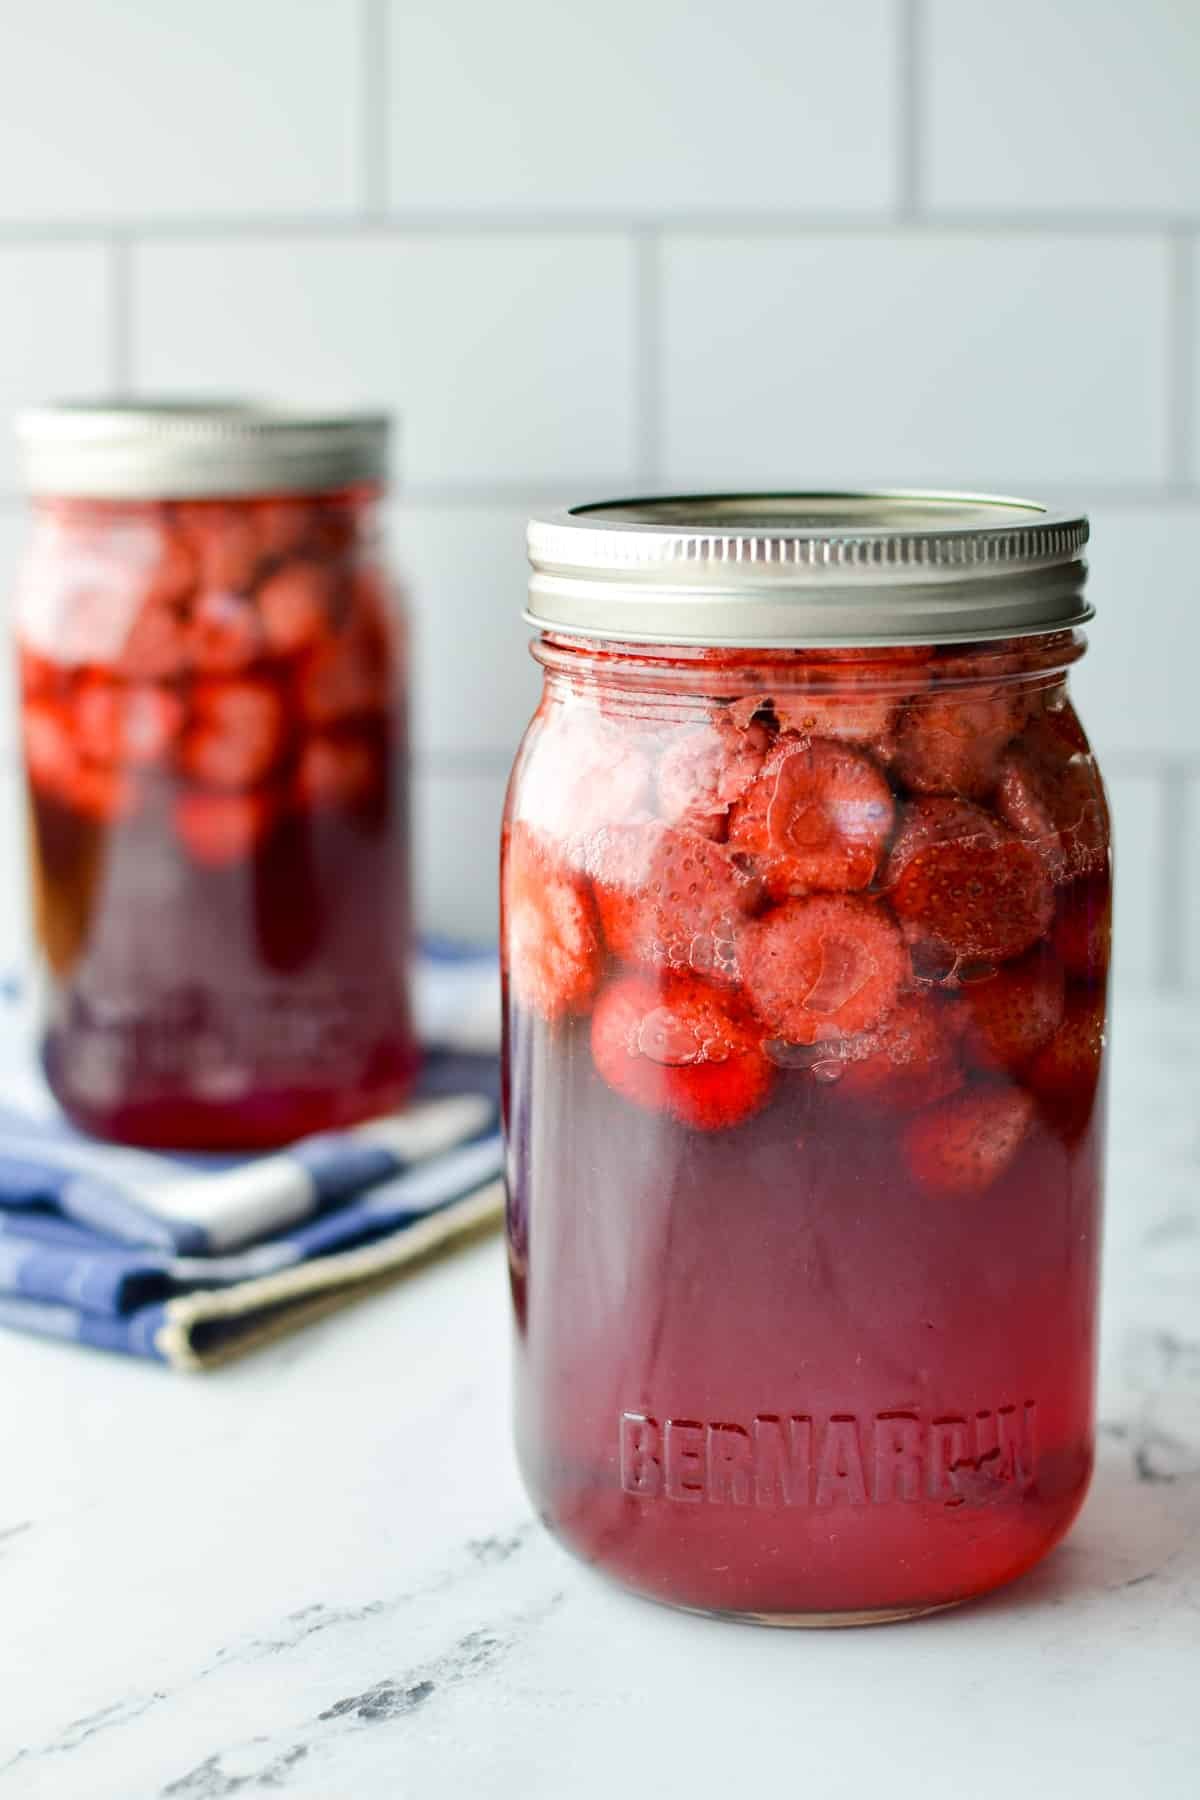 Two jars of home canned strawberries in syrup.